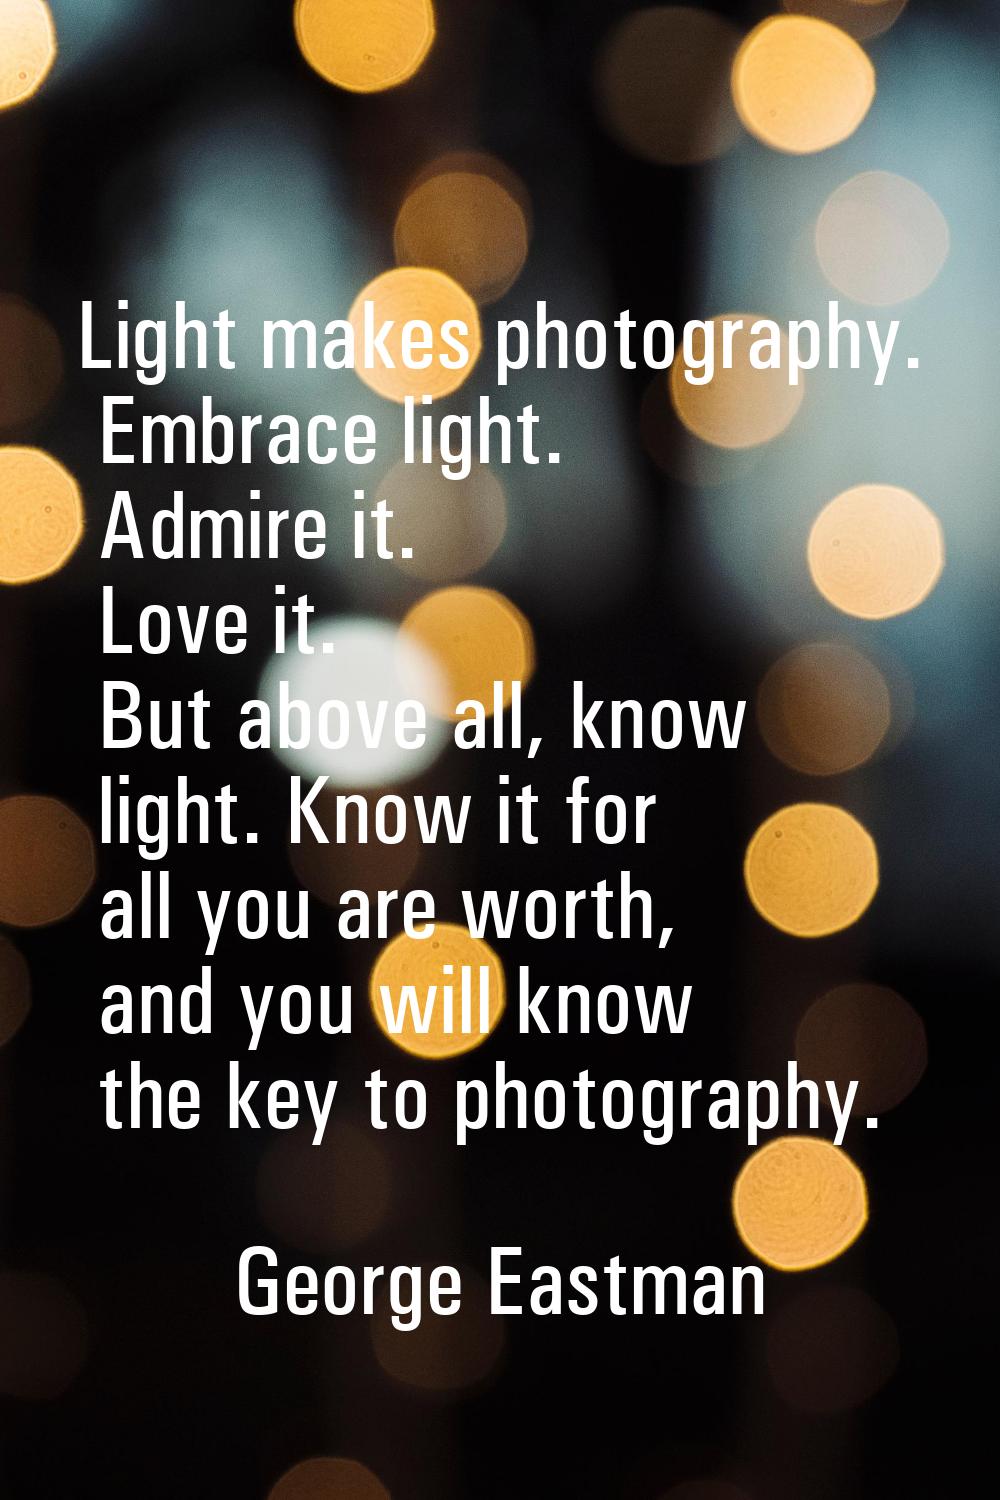 Light makes photography. Embrace light. Admire it. Love it. But above all, know light. Know it for 